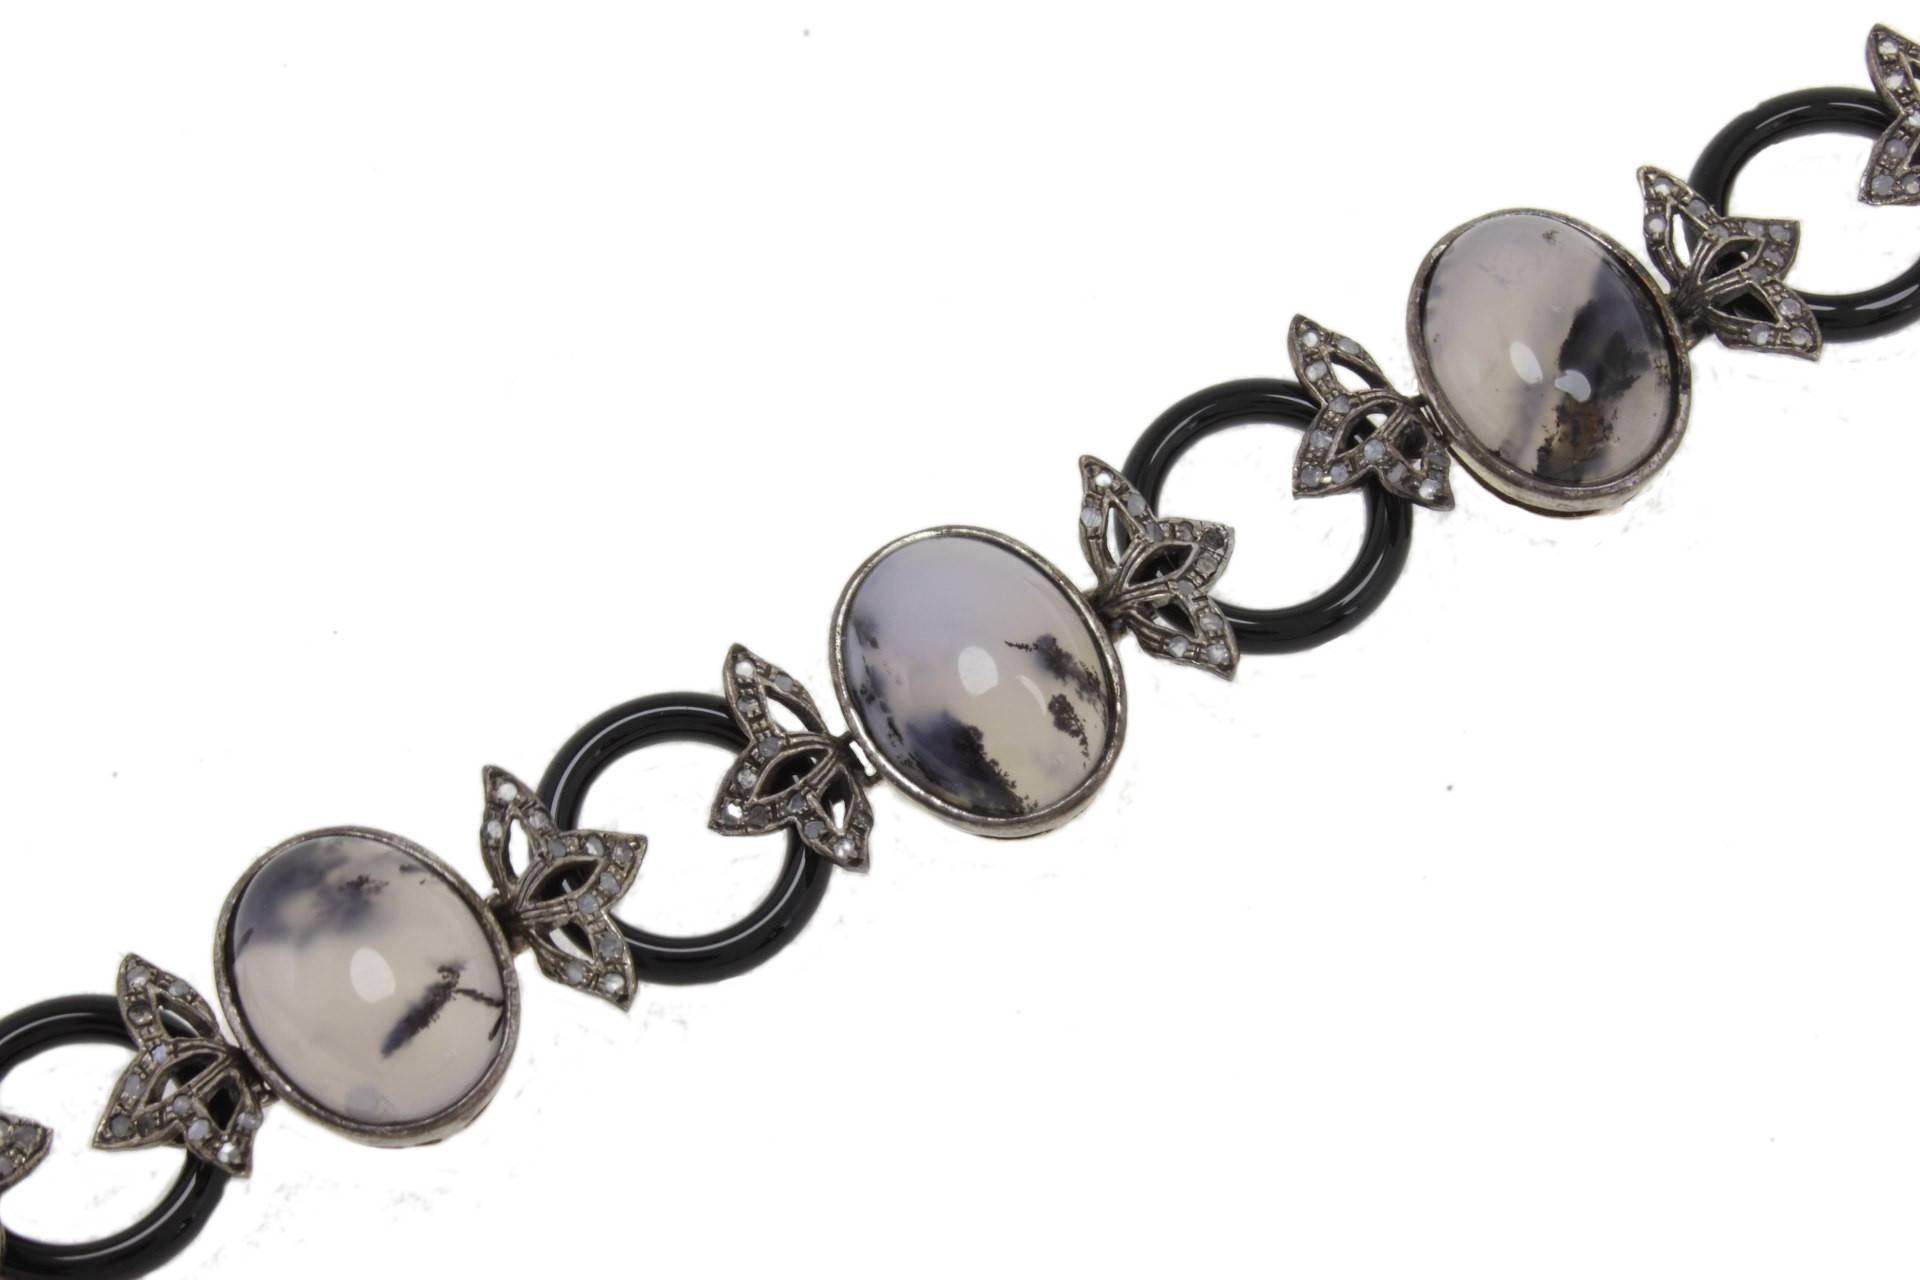 SHIPPING POLICY: 
No additional costs will be added to this order. 
Shipping costs will be totally covered by the seller (customs duties included).

Link bracelet in 9kt gold and silver mounted with diamonds, moss agate, onyx.
Diamonds 0.63 kt
Onyx,